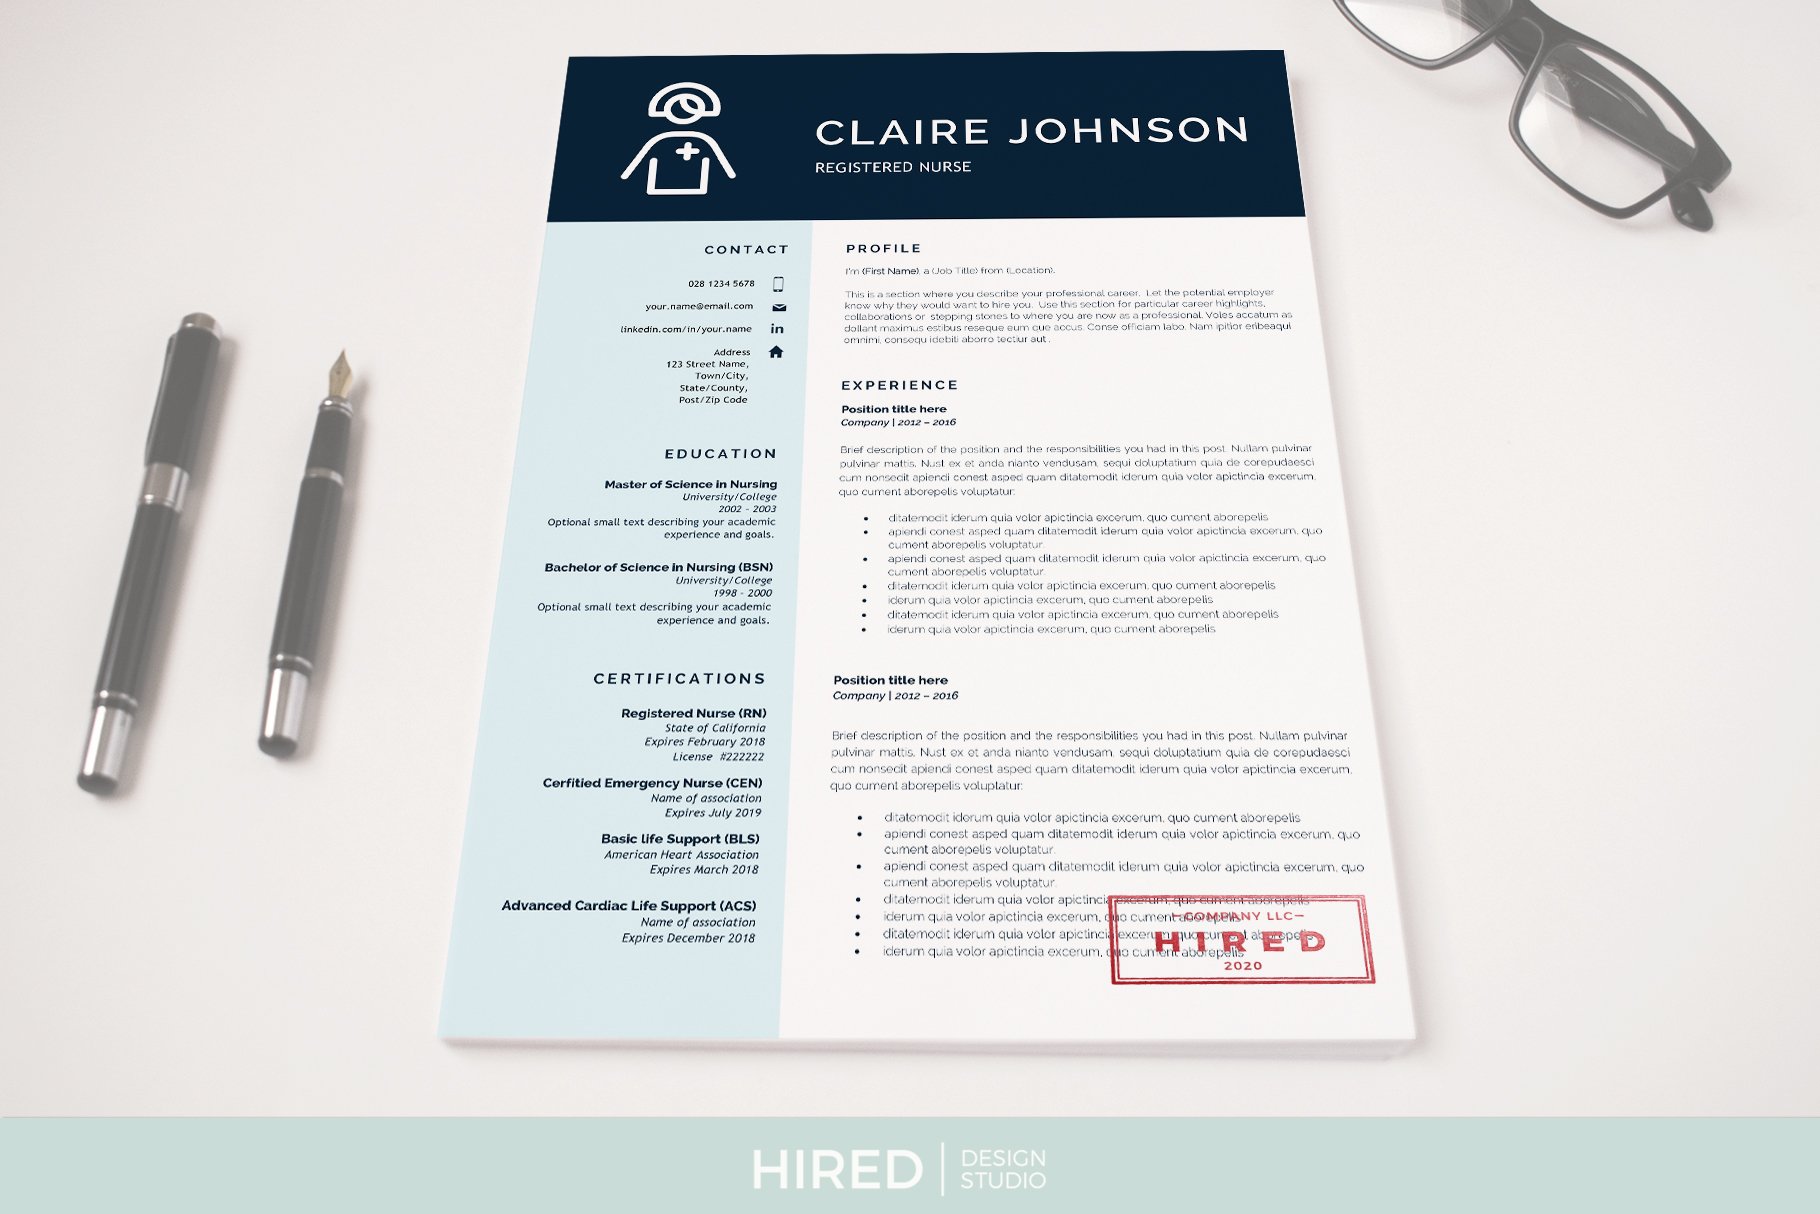 Blue and white resume with a stamp on it.